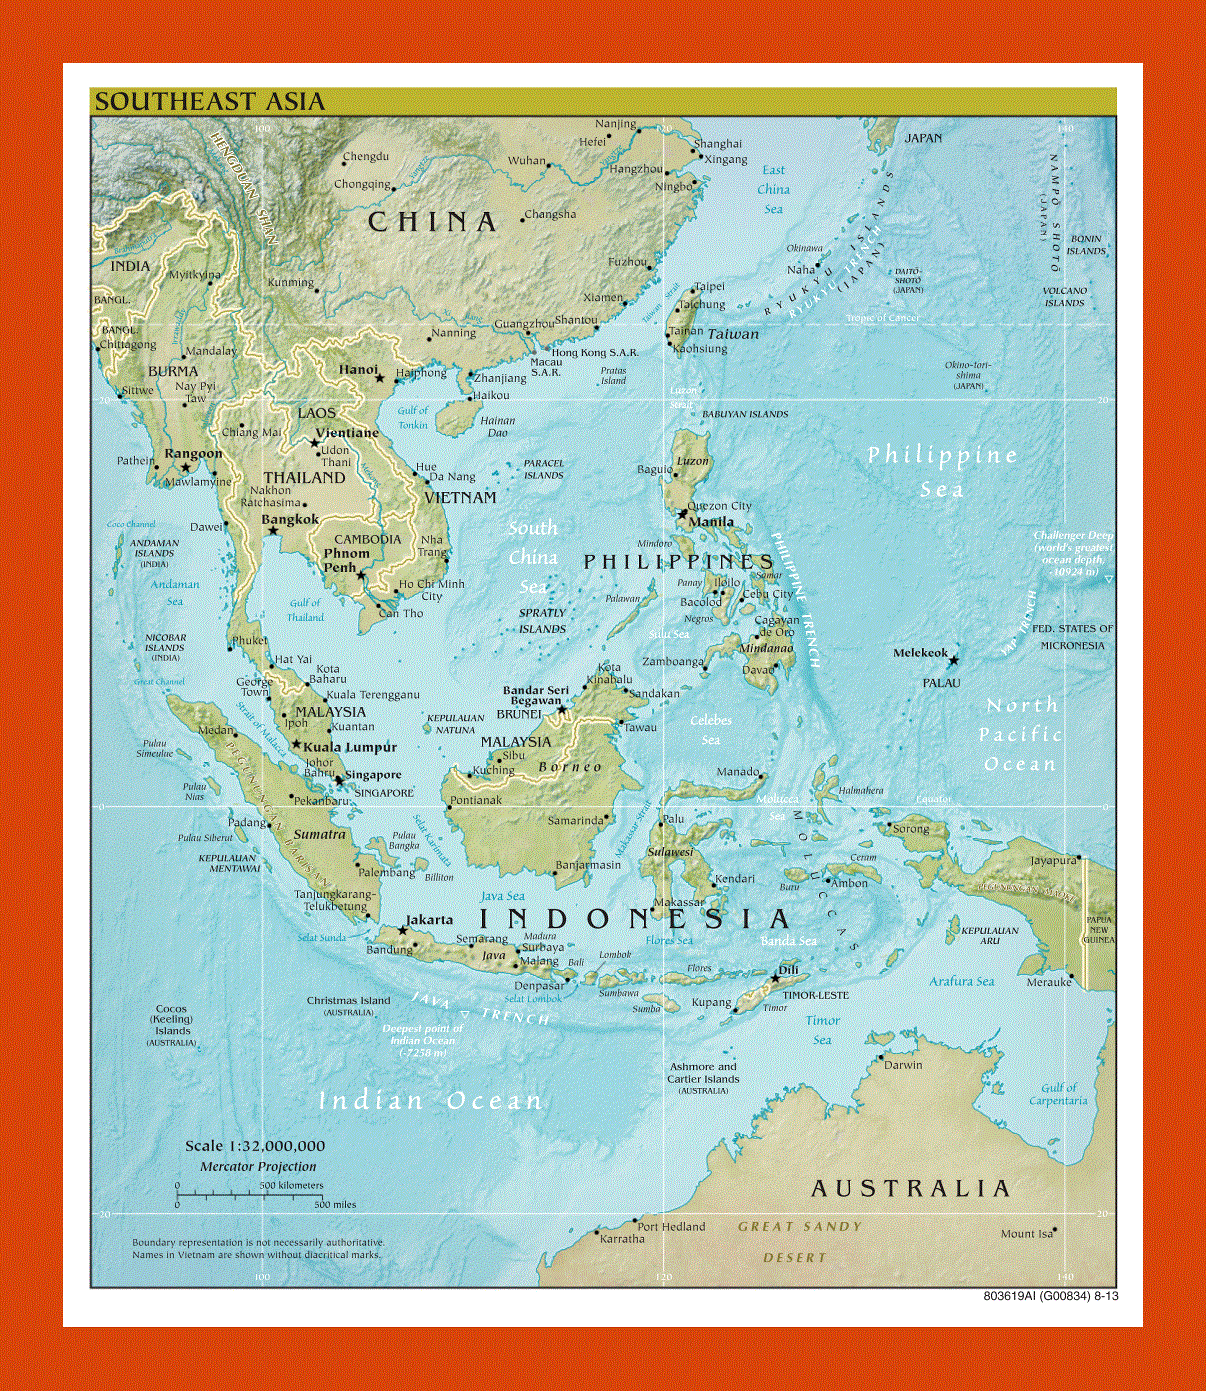 Political map of Southeast Asia - 2013